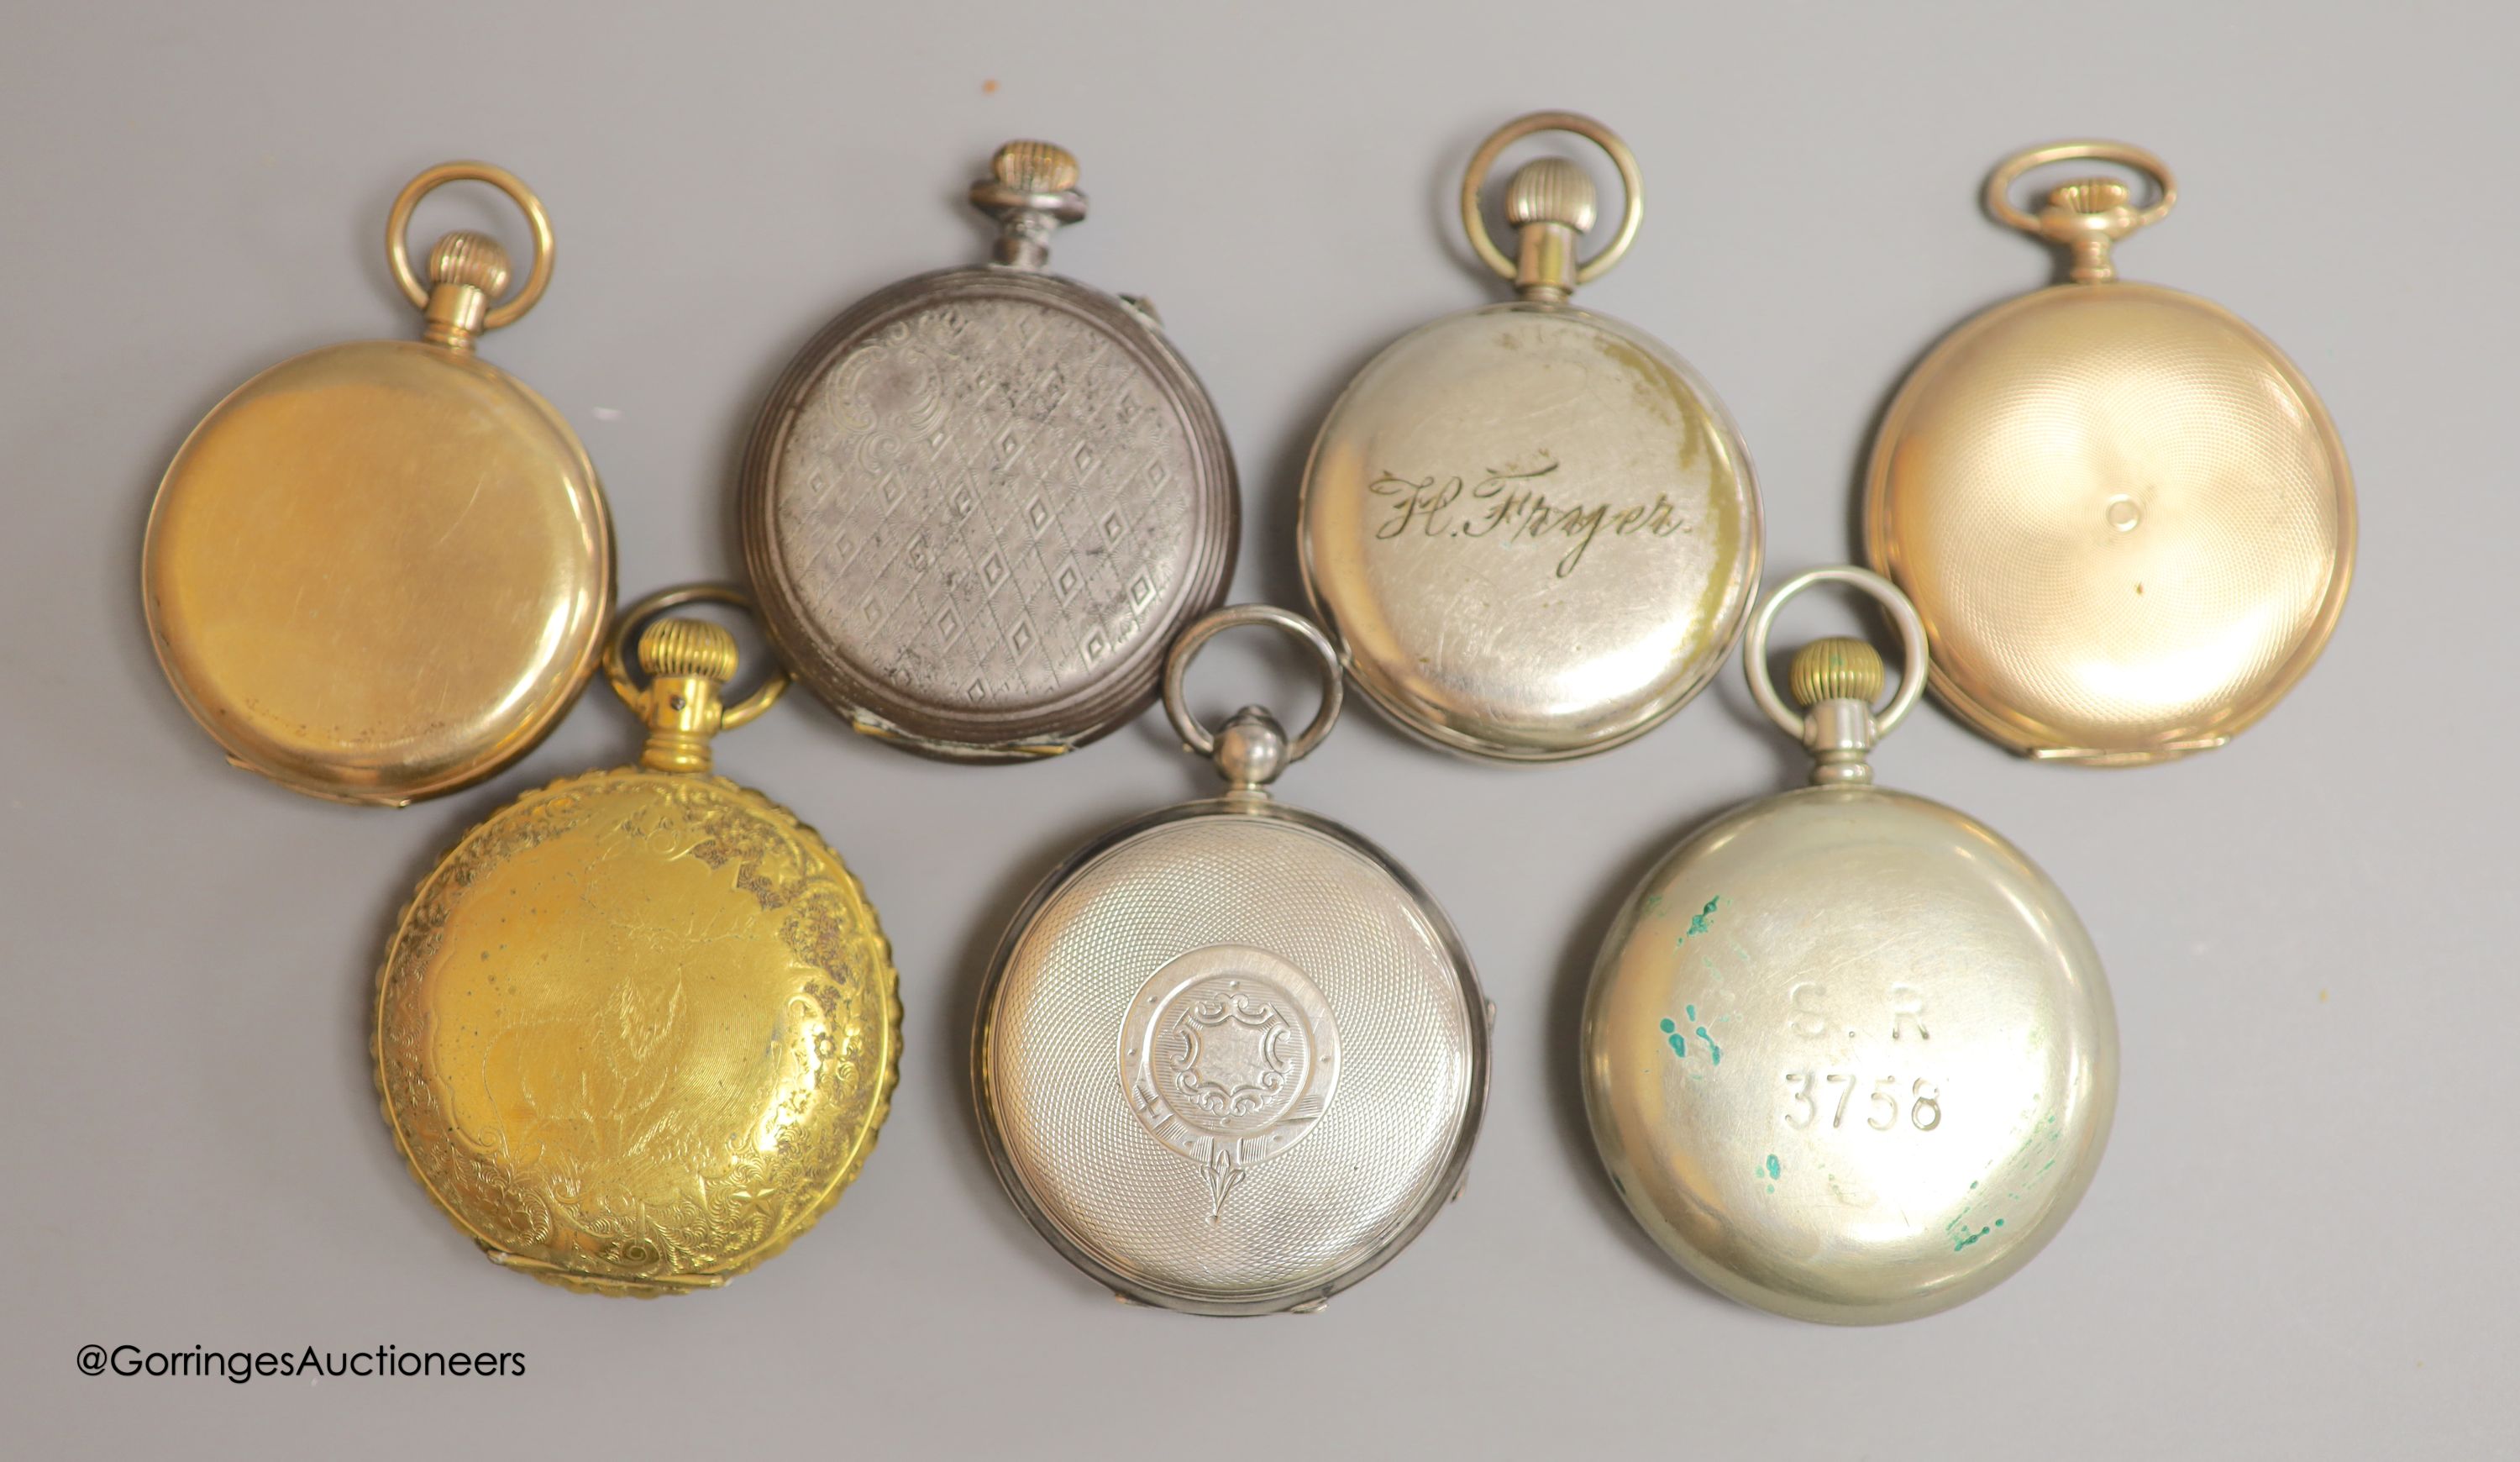 Seven assorted pocket watches including a 9ct gold open face J.W. Benson pocket watch, gross weight 83.3 grams, a silver open face pocket watch by H. Samuel, Manchester and five other gold plated or base metal pocket wat